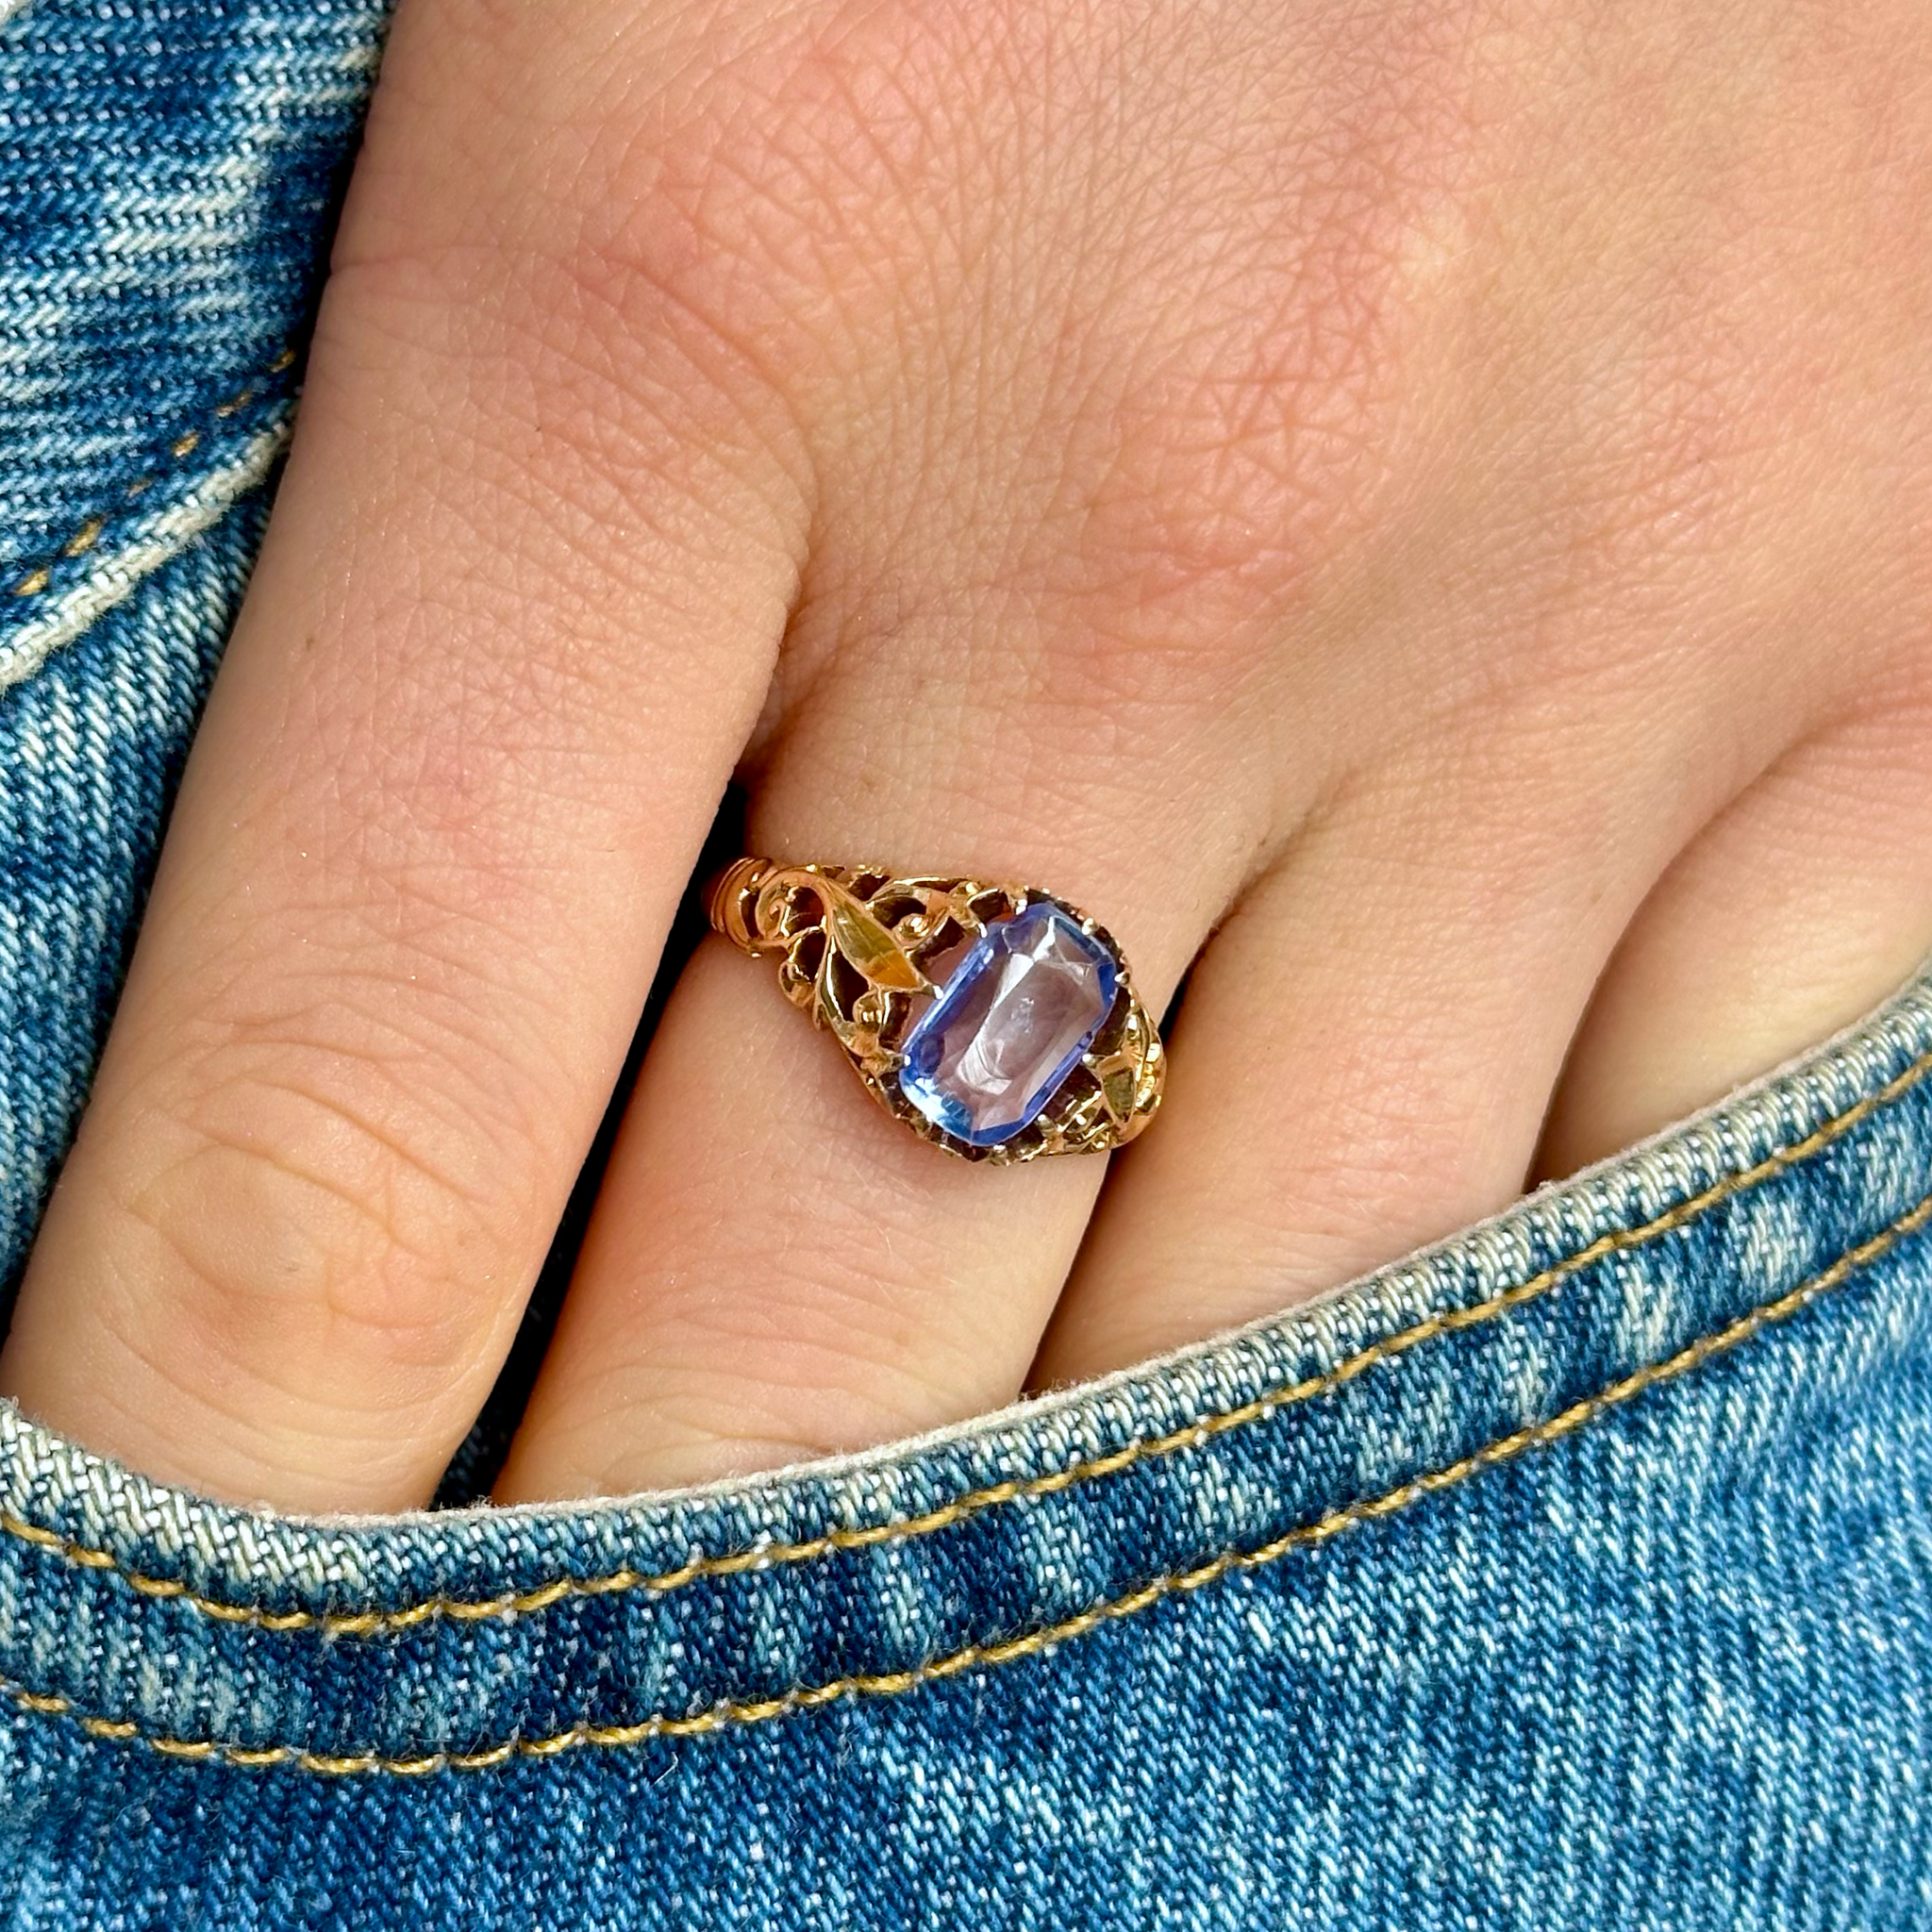 Antique, Victorian Ceylon Sapphire Ring, 18ct Yellow Gold worn on hand in pocket of jeans